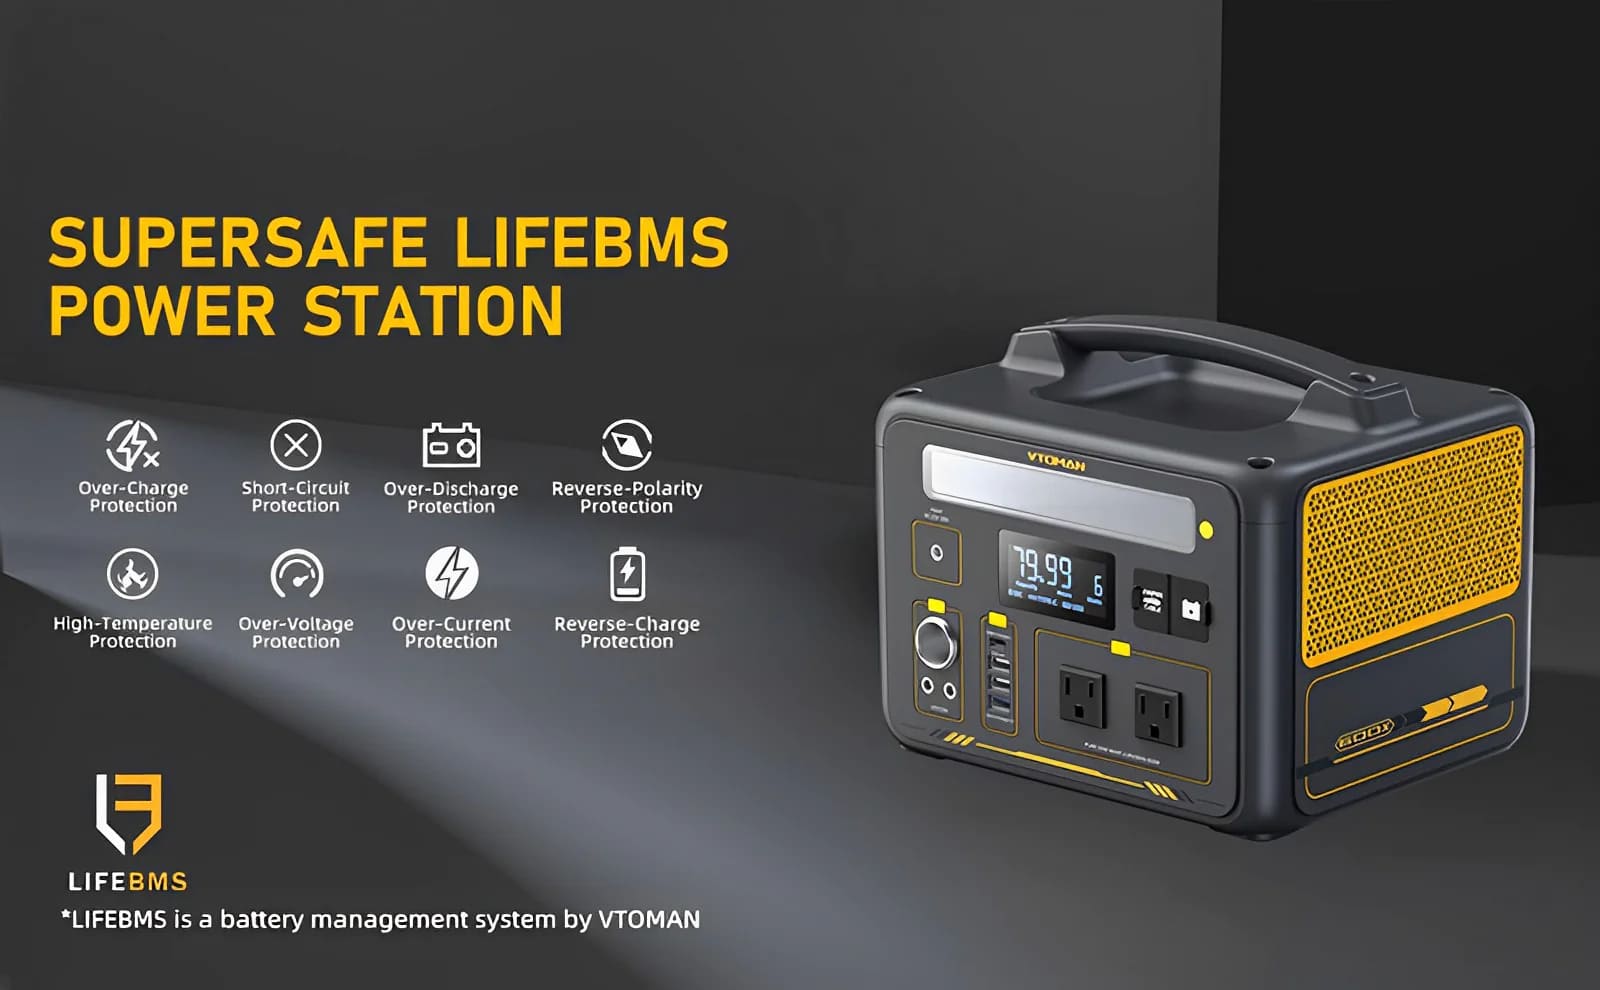 VTOMAN Jump 600X battery generator features a super safe LIFEBMS protection system developed by VTOMAN